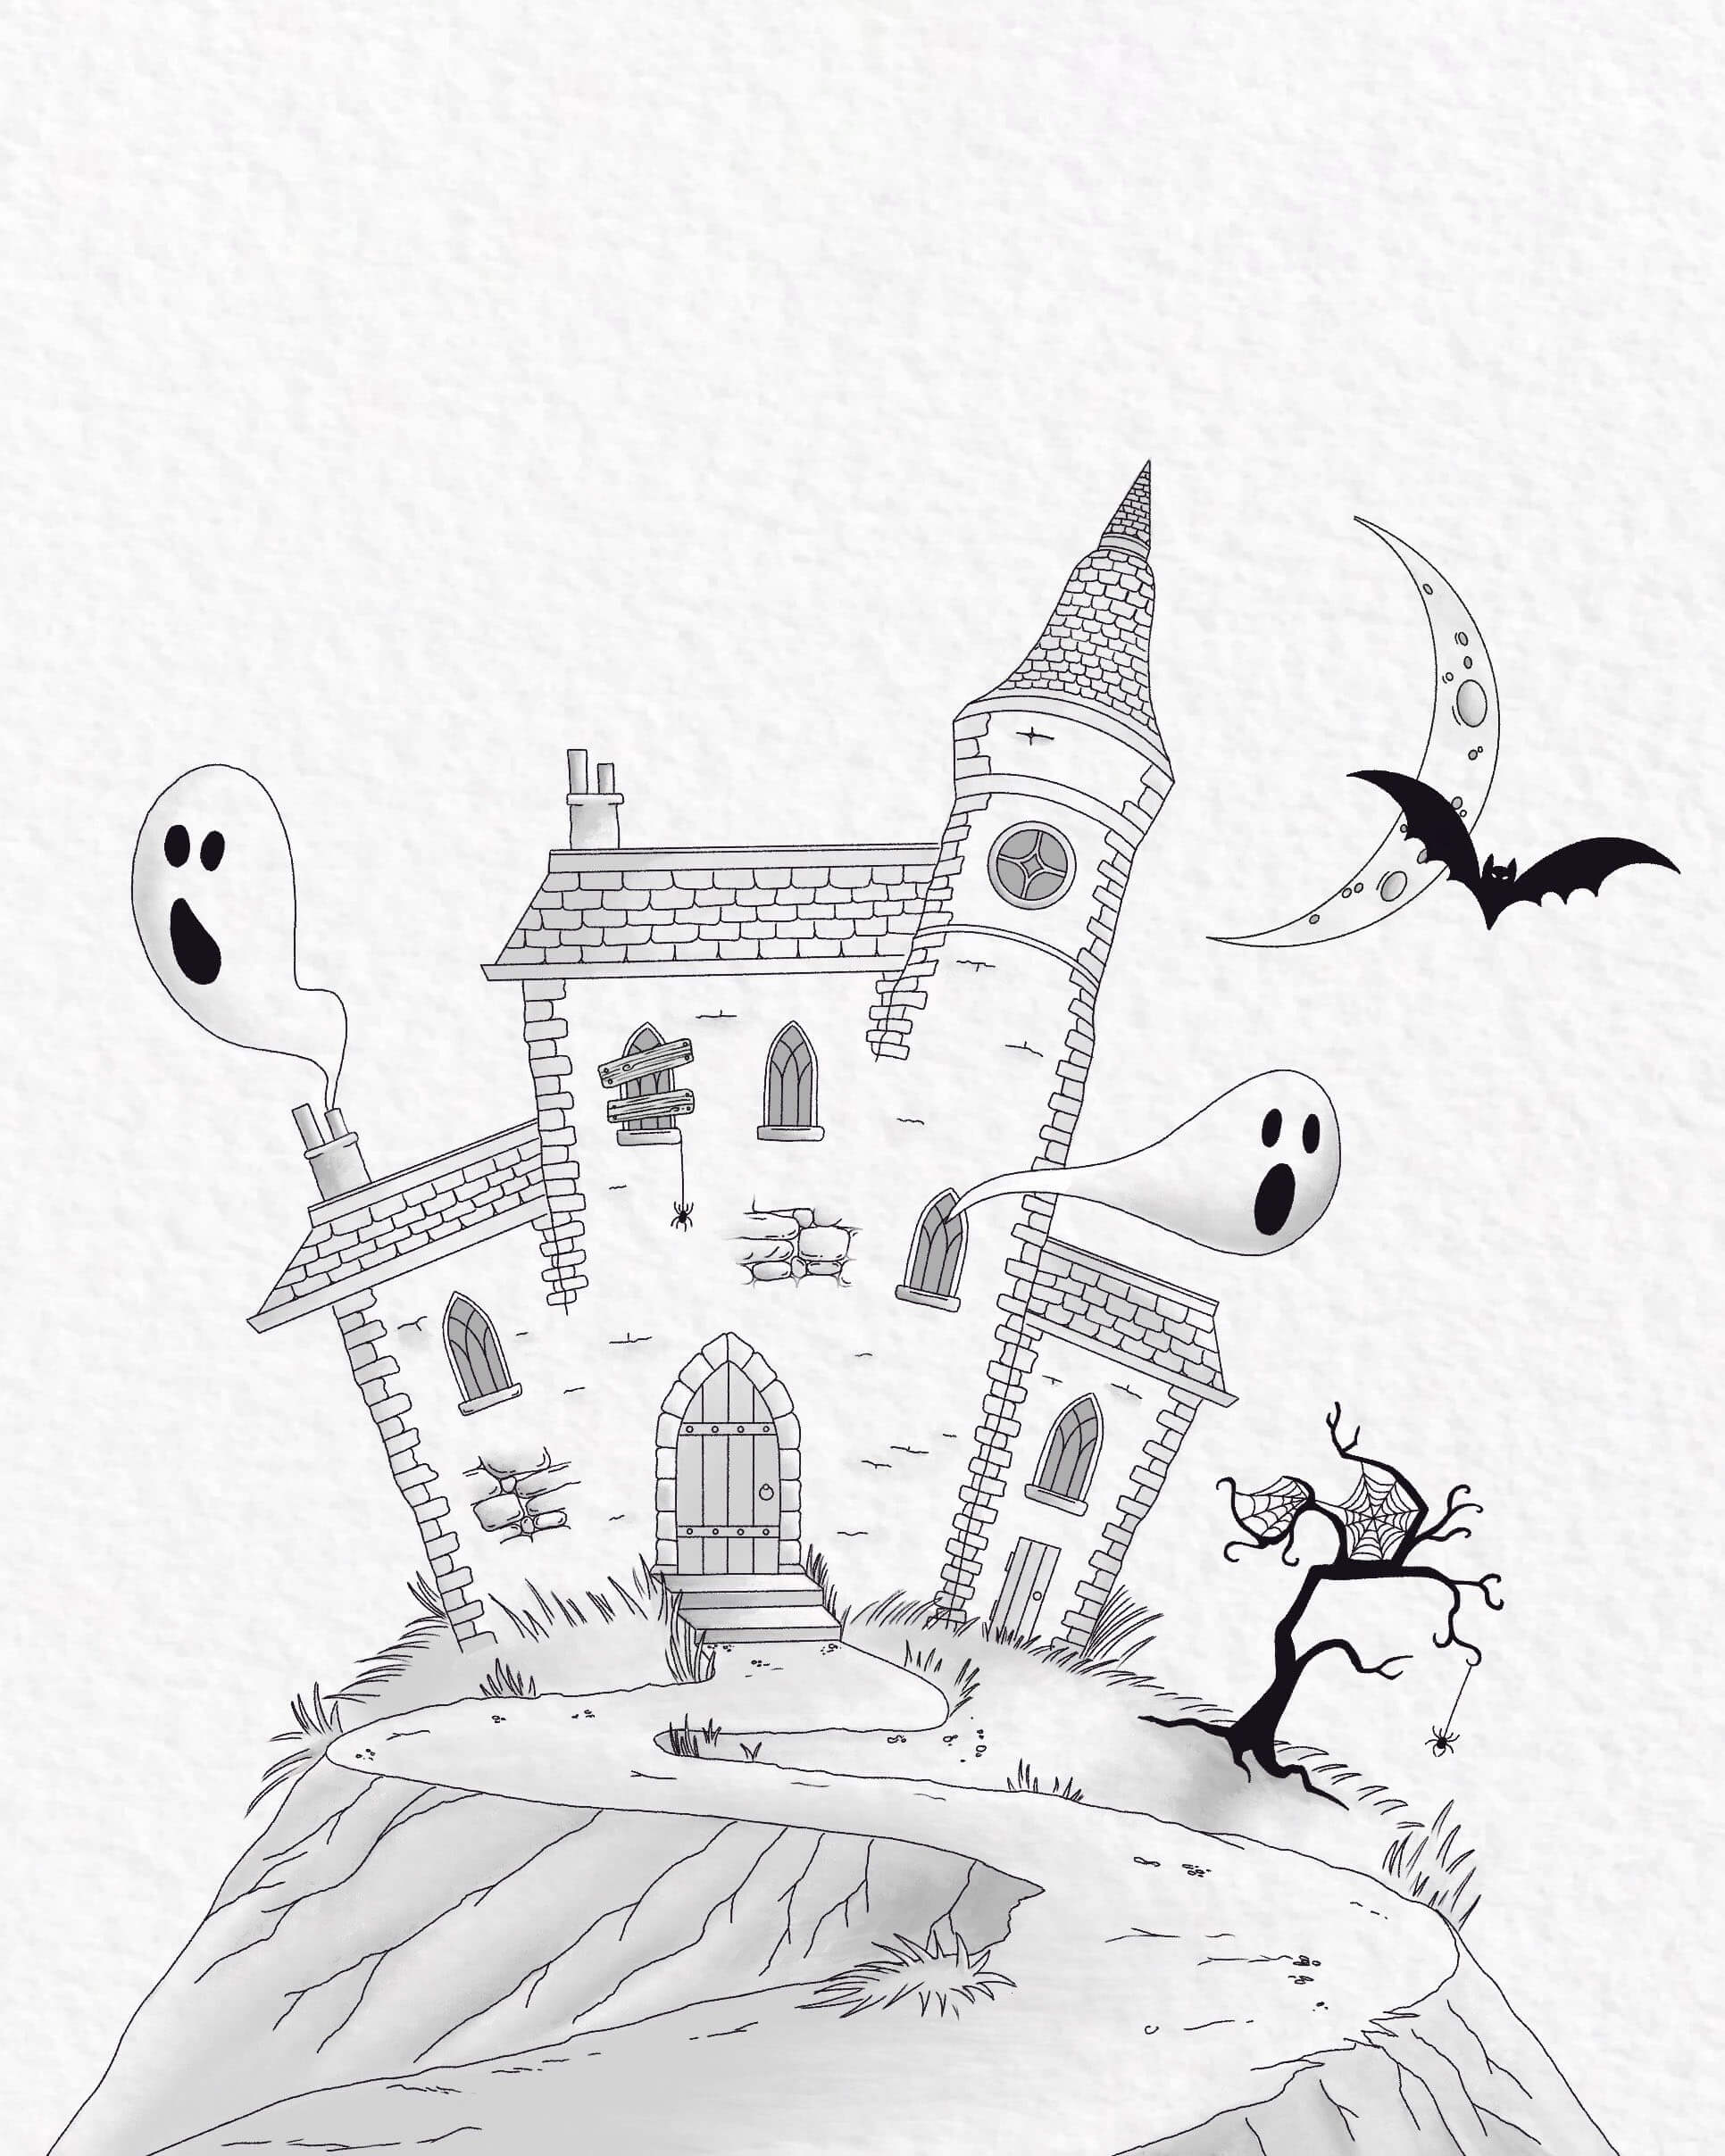 Spooky house illustration Black and White Stock Photos & Images - Alamy